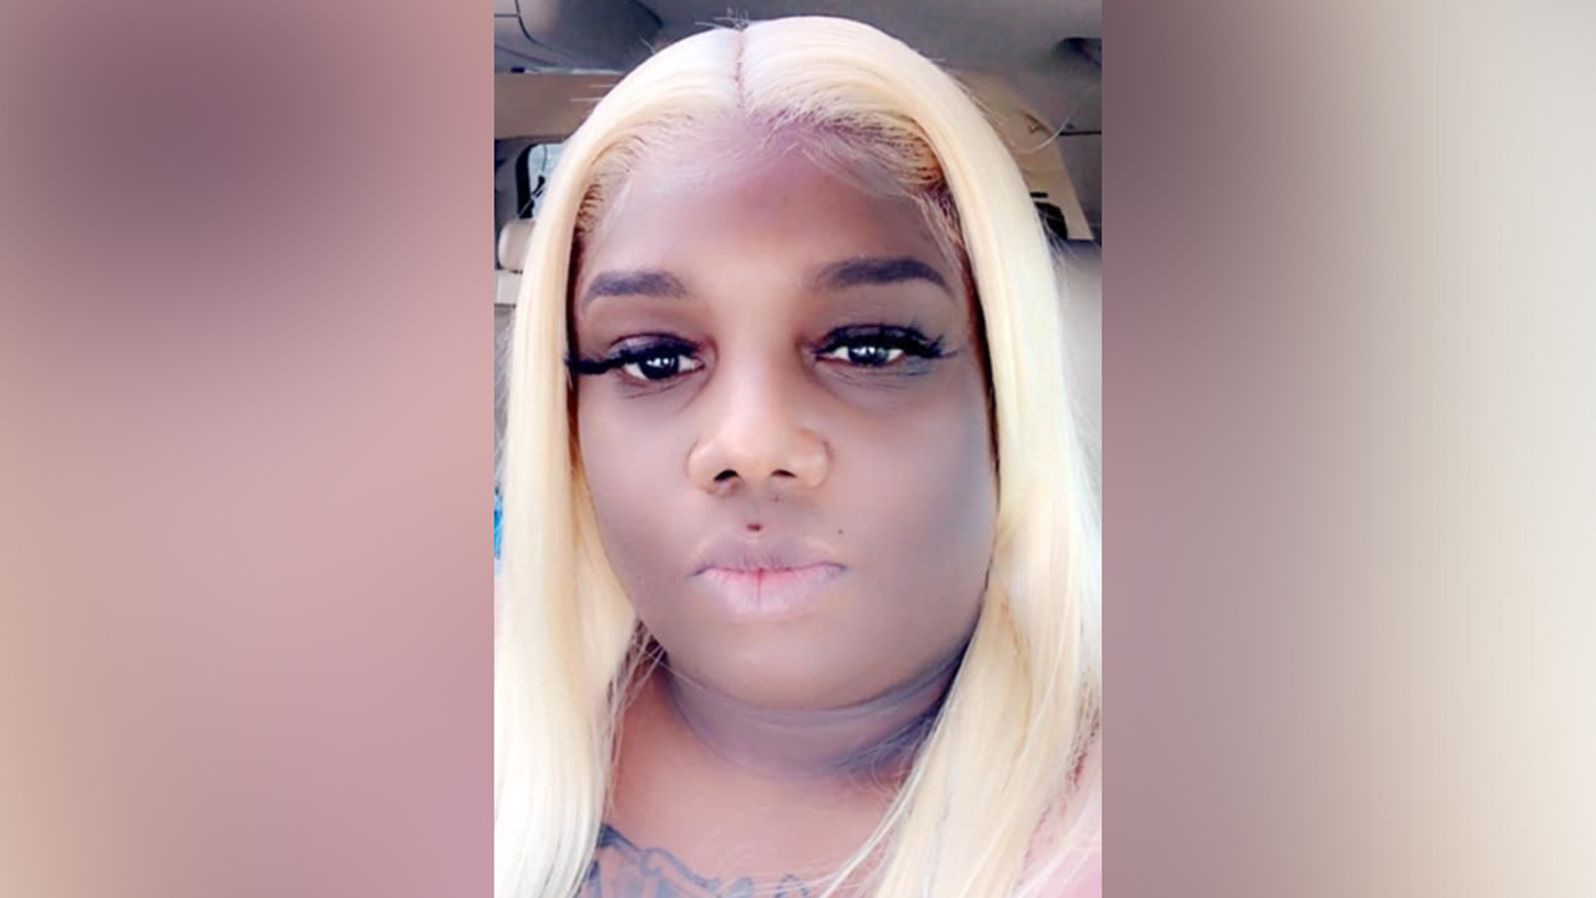 Felycya Harris, 33, was found dead in a park in Augusta, Georgia, on Saturday. She is the 31st transgender or gender non-conforming person to be killed this year, the Human Rights Campaign said.